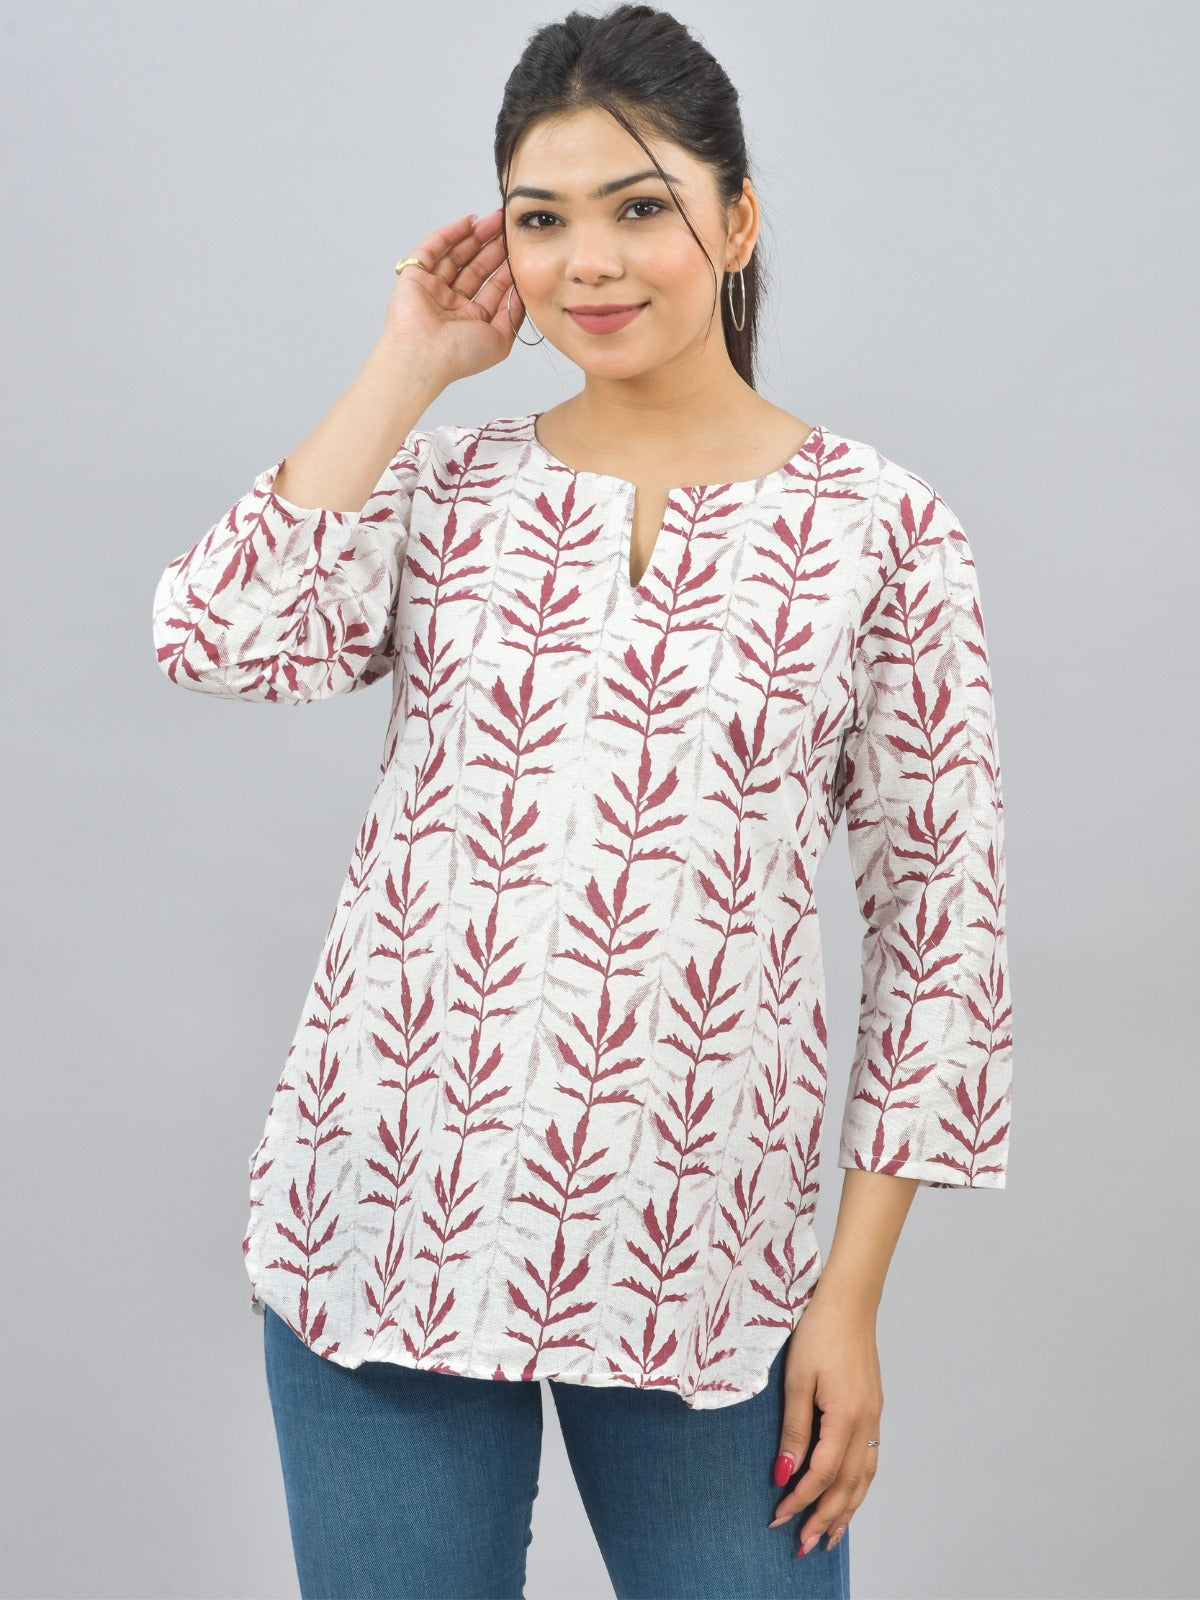 Pack Of 2 Womens Regular Fit Blue Leaf And Maroon Leaf Printed Tops Combo